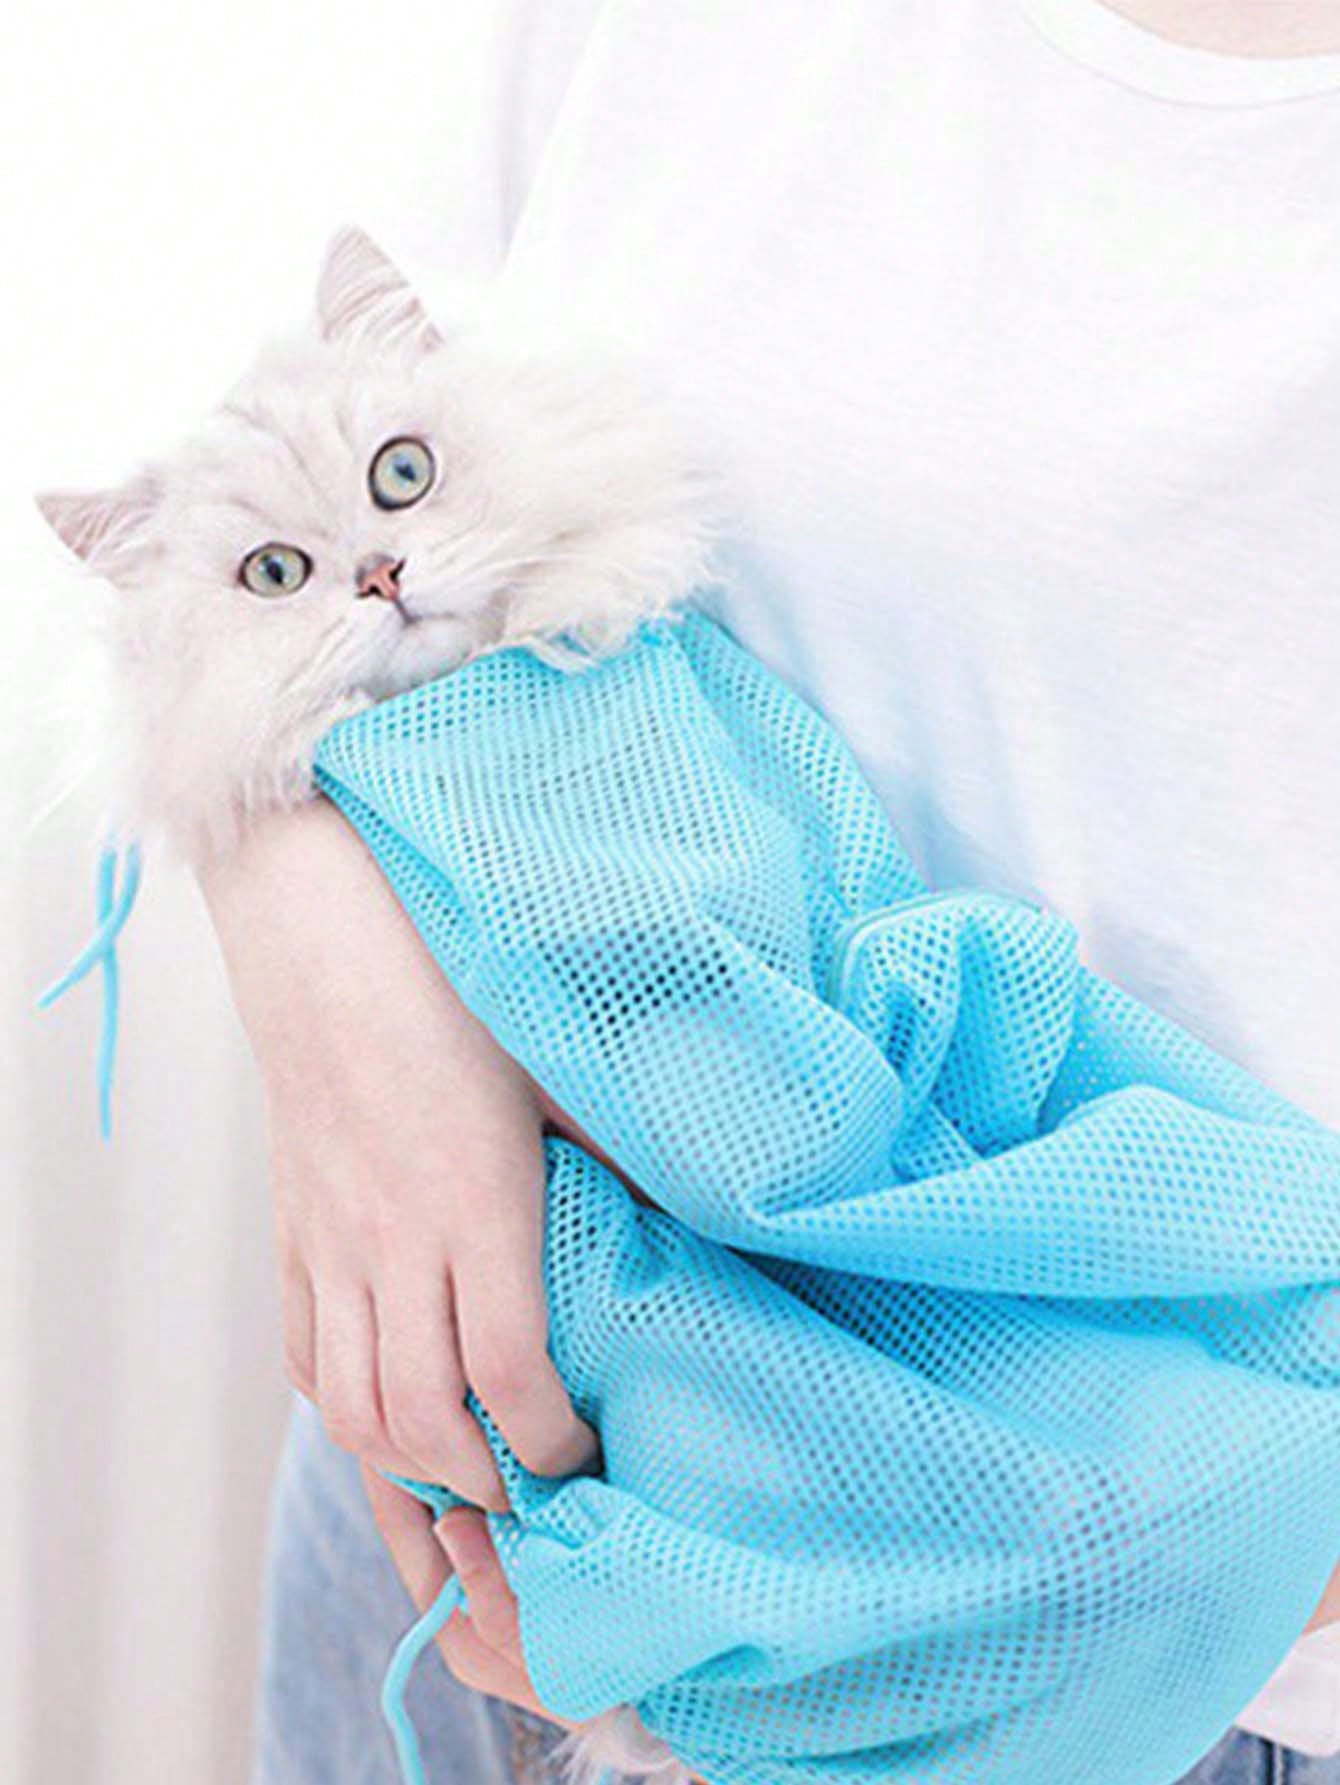 Cat Washing Bag - Multifunctional Cat Bathing, Grooming, Nail-trimming, Ear-cleaning Restraint Bag To Prevent Scratching